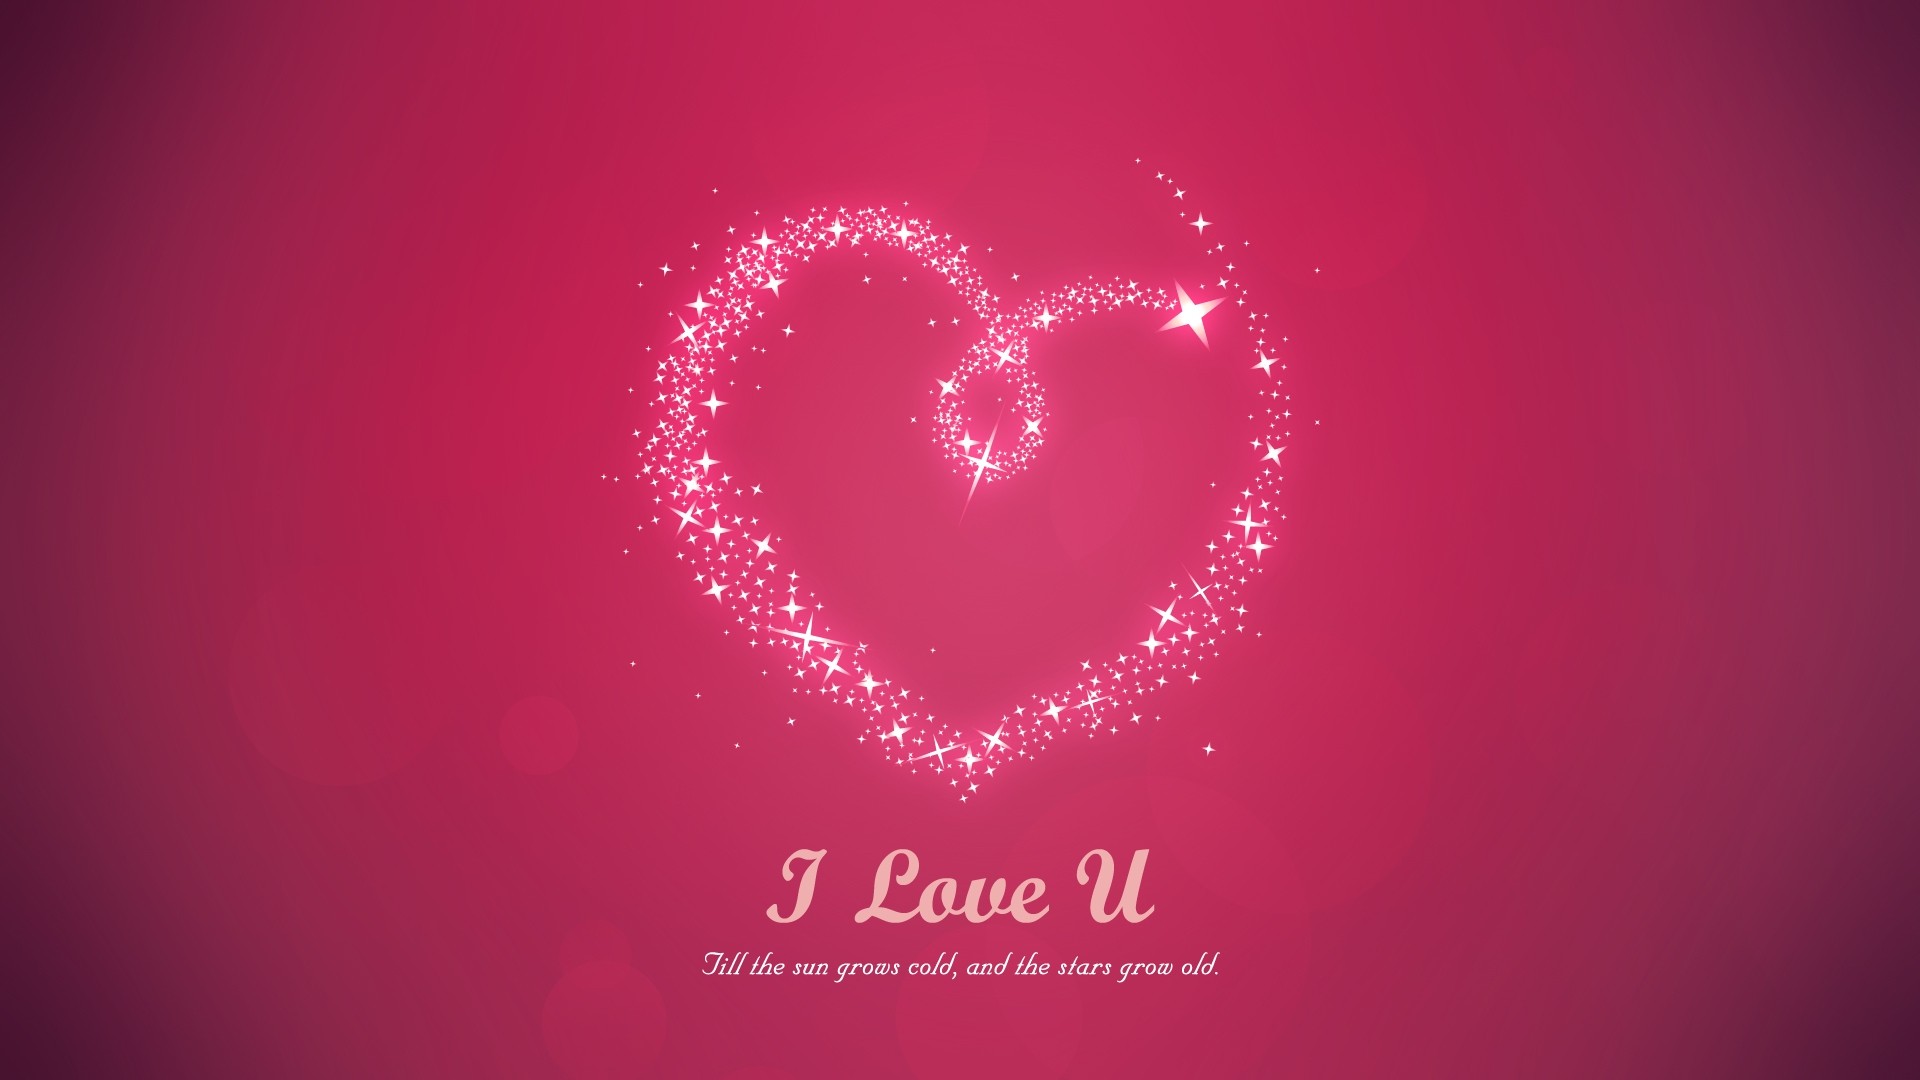 Top I Love You Mom Wallpaper Desktop 4k Download Wallpapers Book Your 1 Source For Free Download Hd 4k High Quality Wallpapers